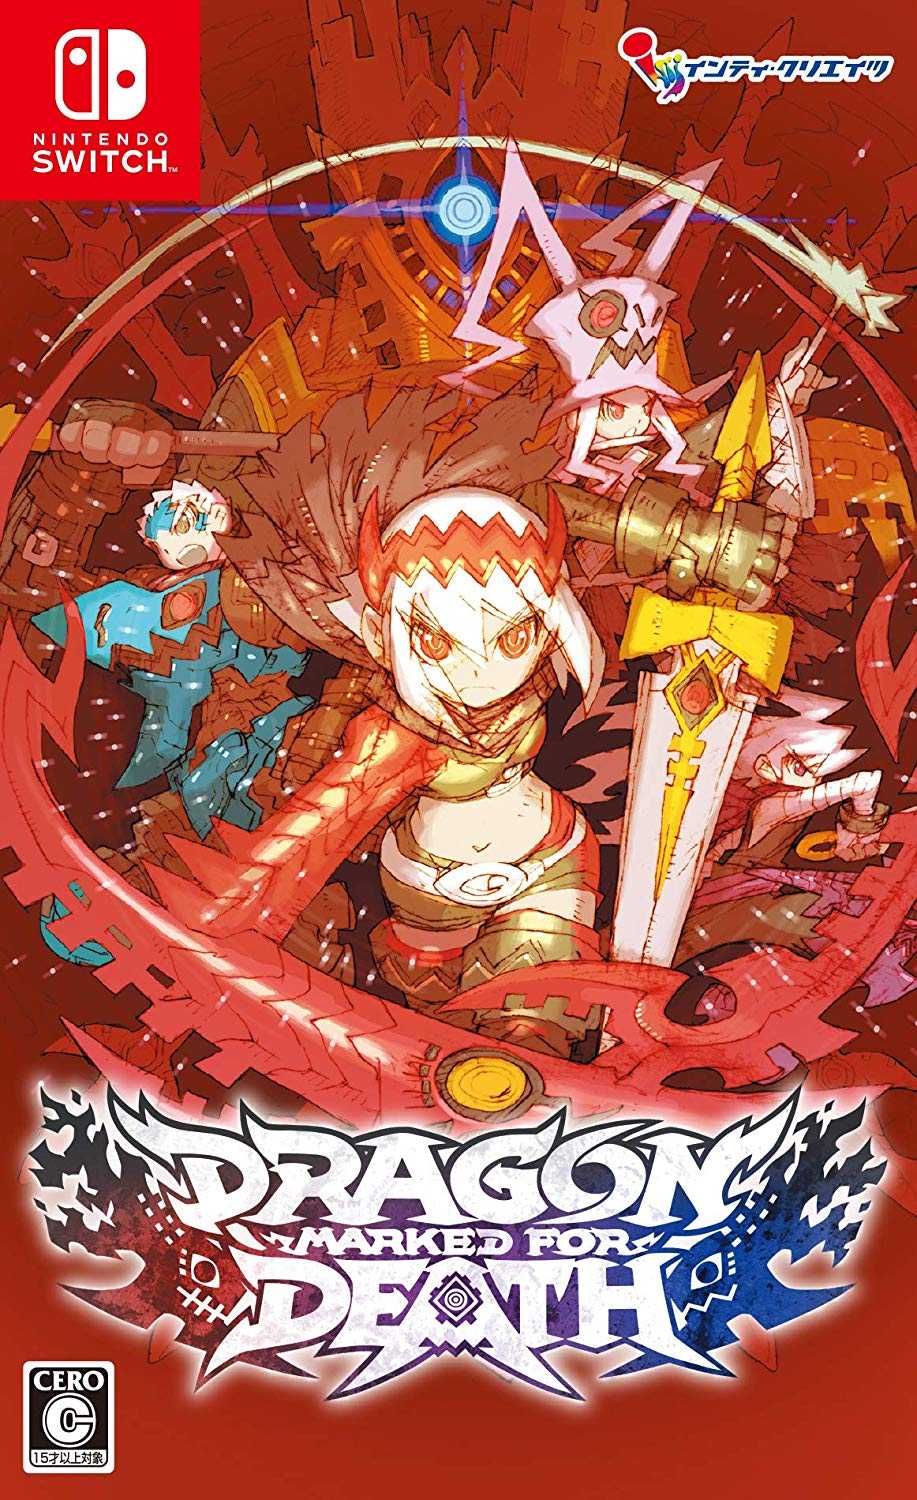 Switch NS 逝血龍痕 龍血一族 死亡標記 Dragon: Marked for Death